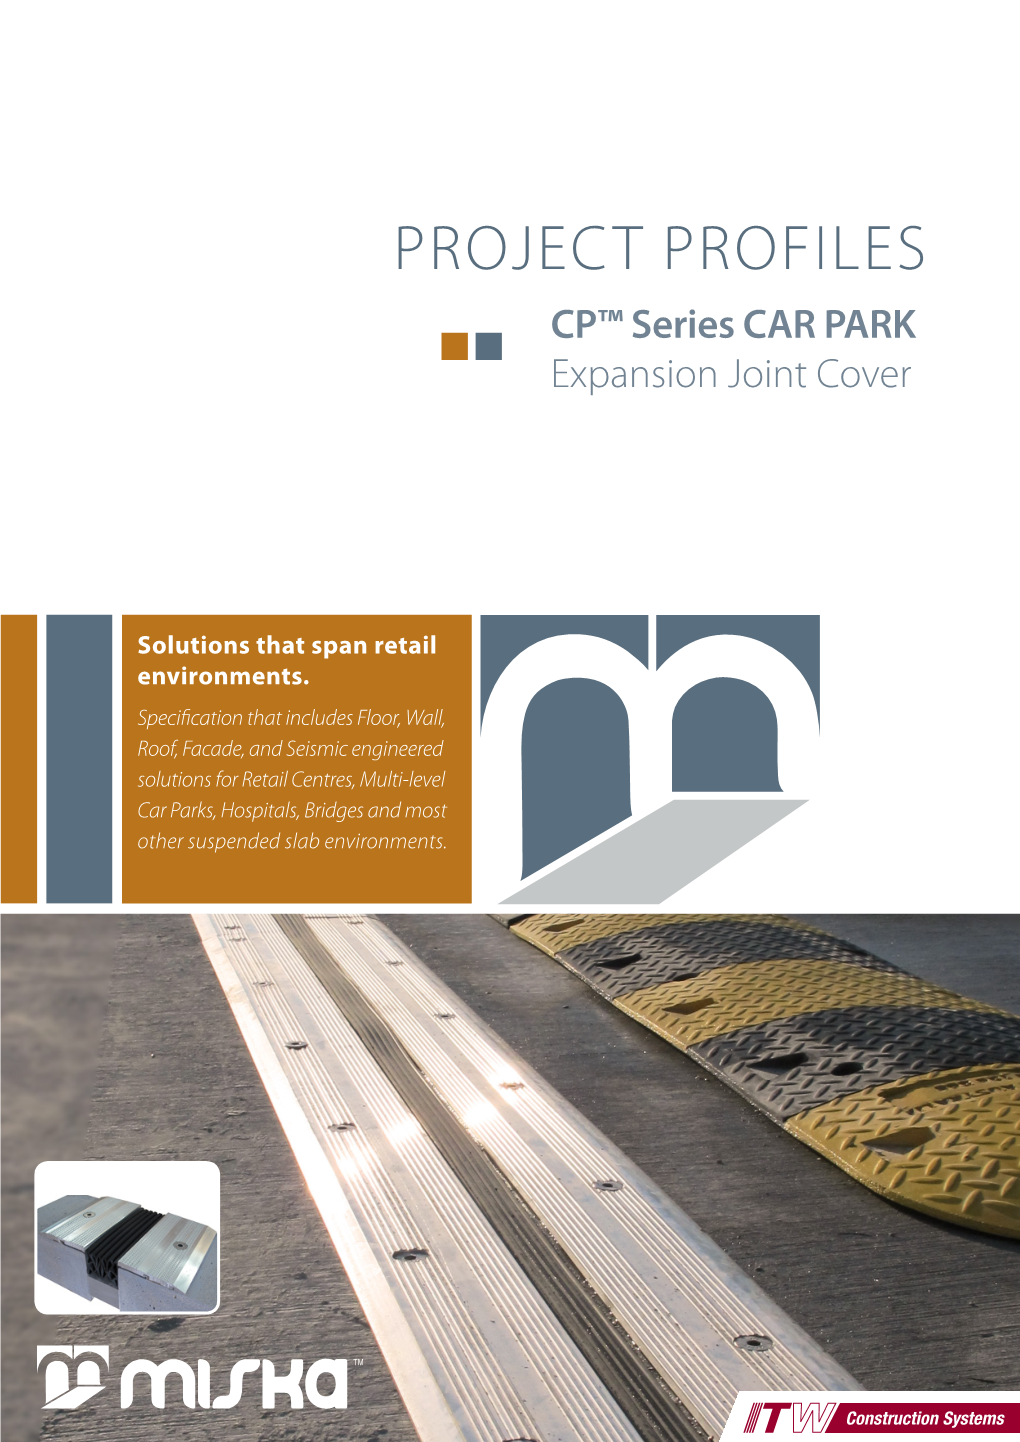 PROJECT PROFILES CP™ Series CAR PARK Expansion Joint Cover